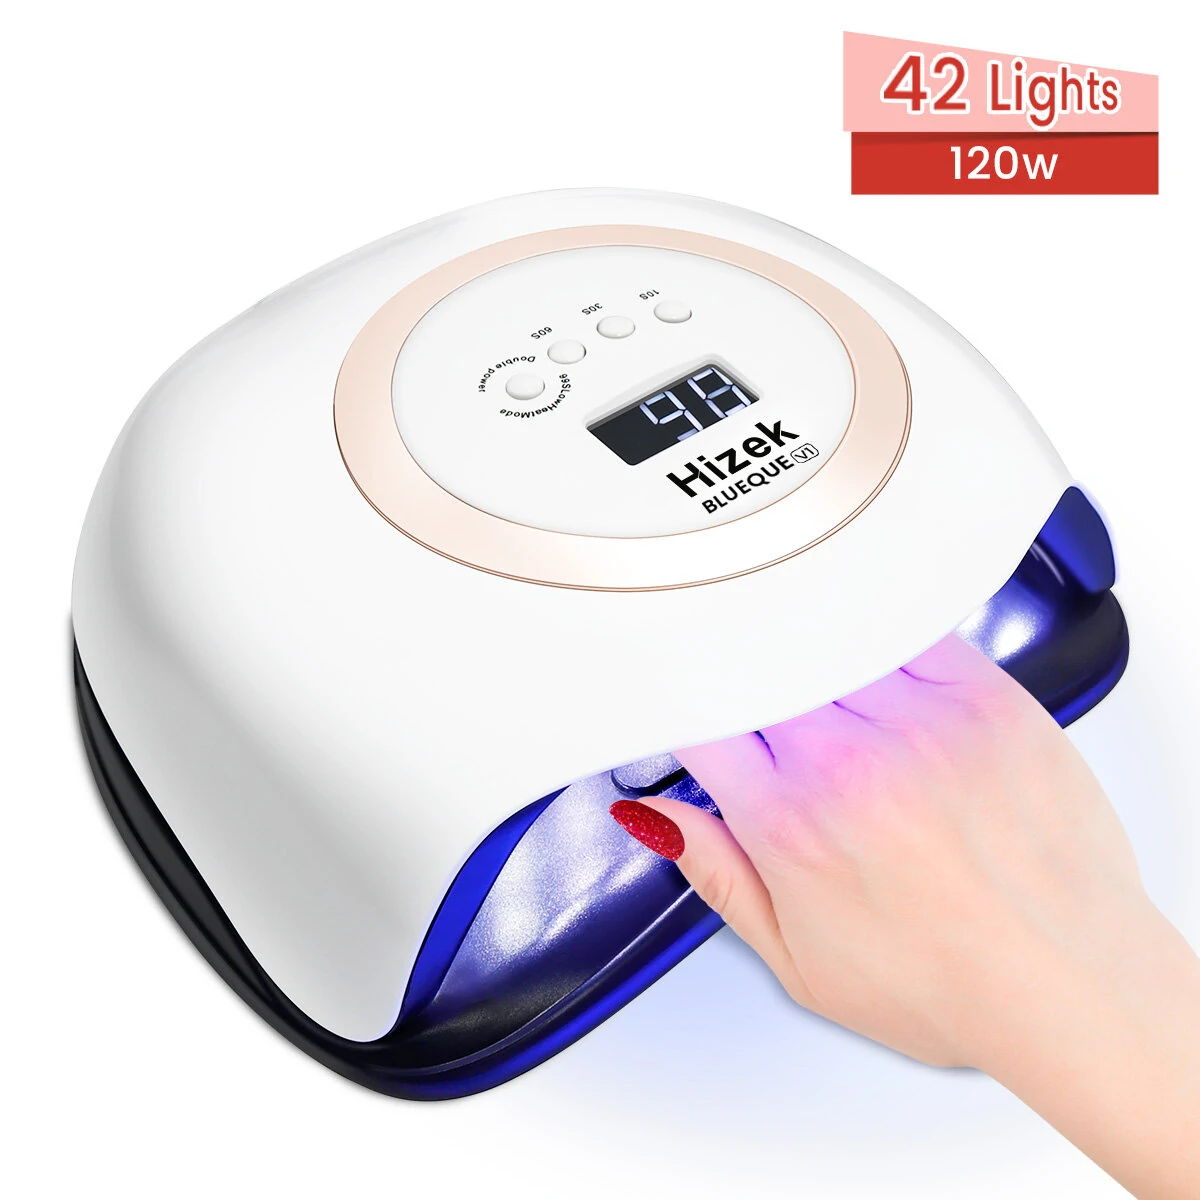 Nail Lamp Dual Light Source with 42 Light Beads 120W Curing LED UV Gel Polish